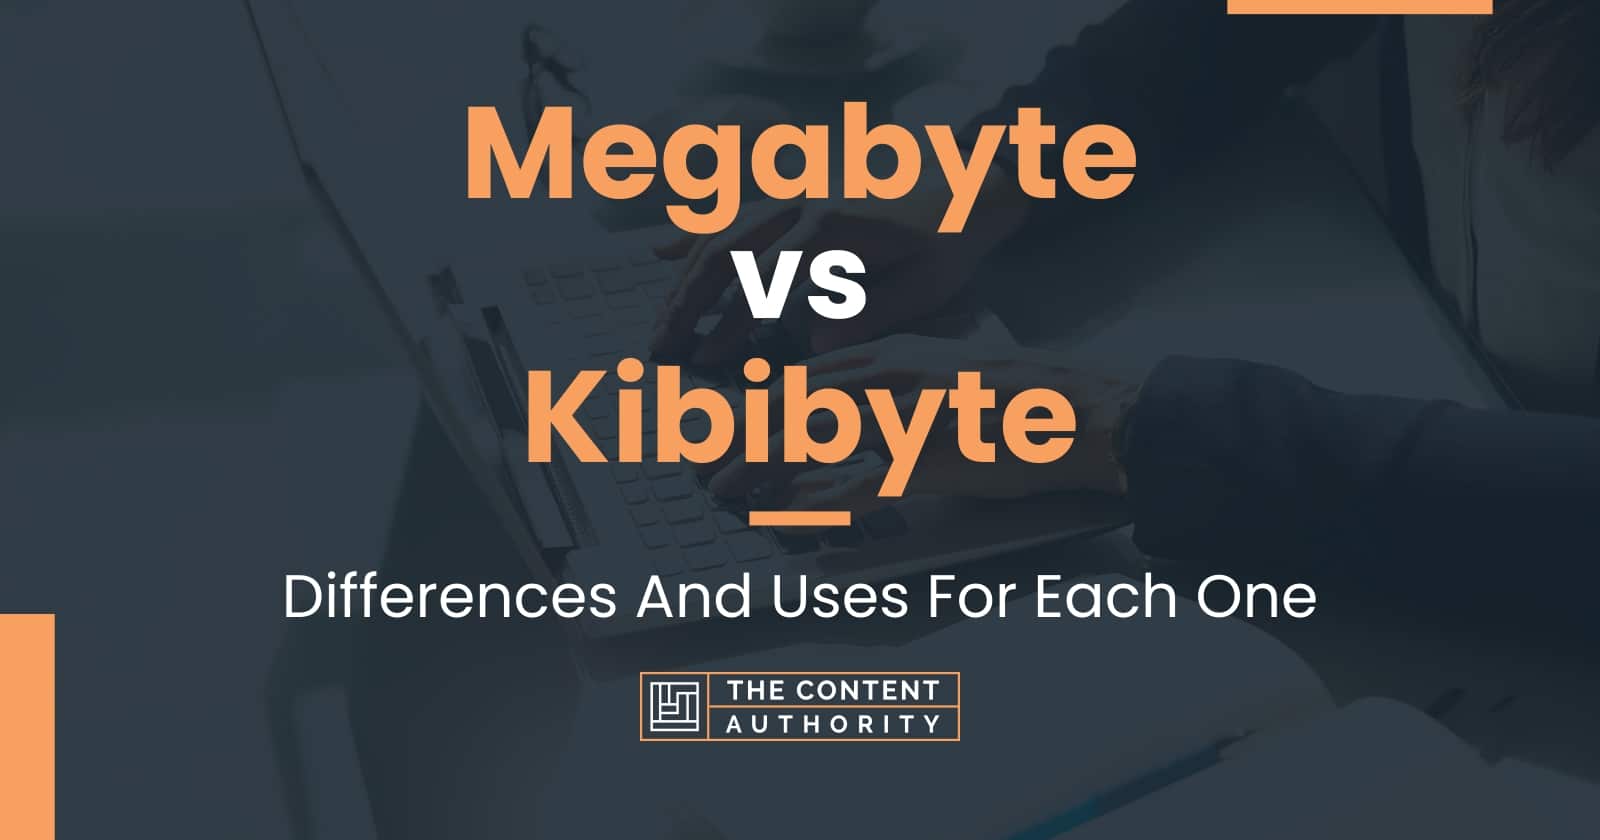 Megabyte vs Kibibyte: Differences And Uses For Each One